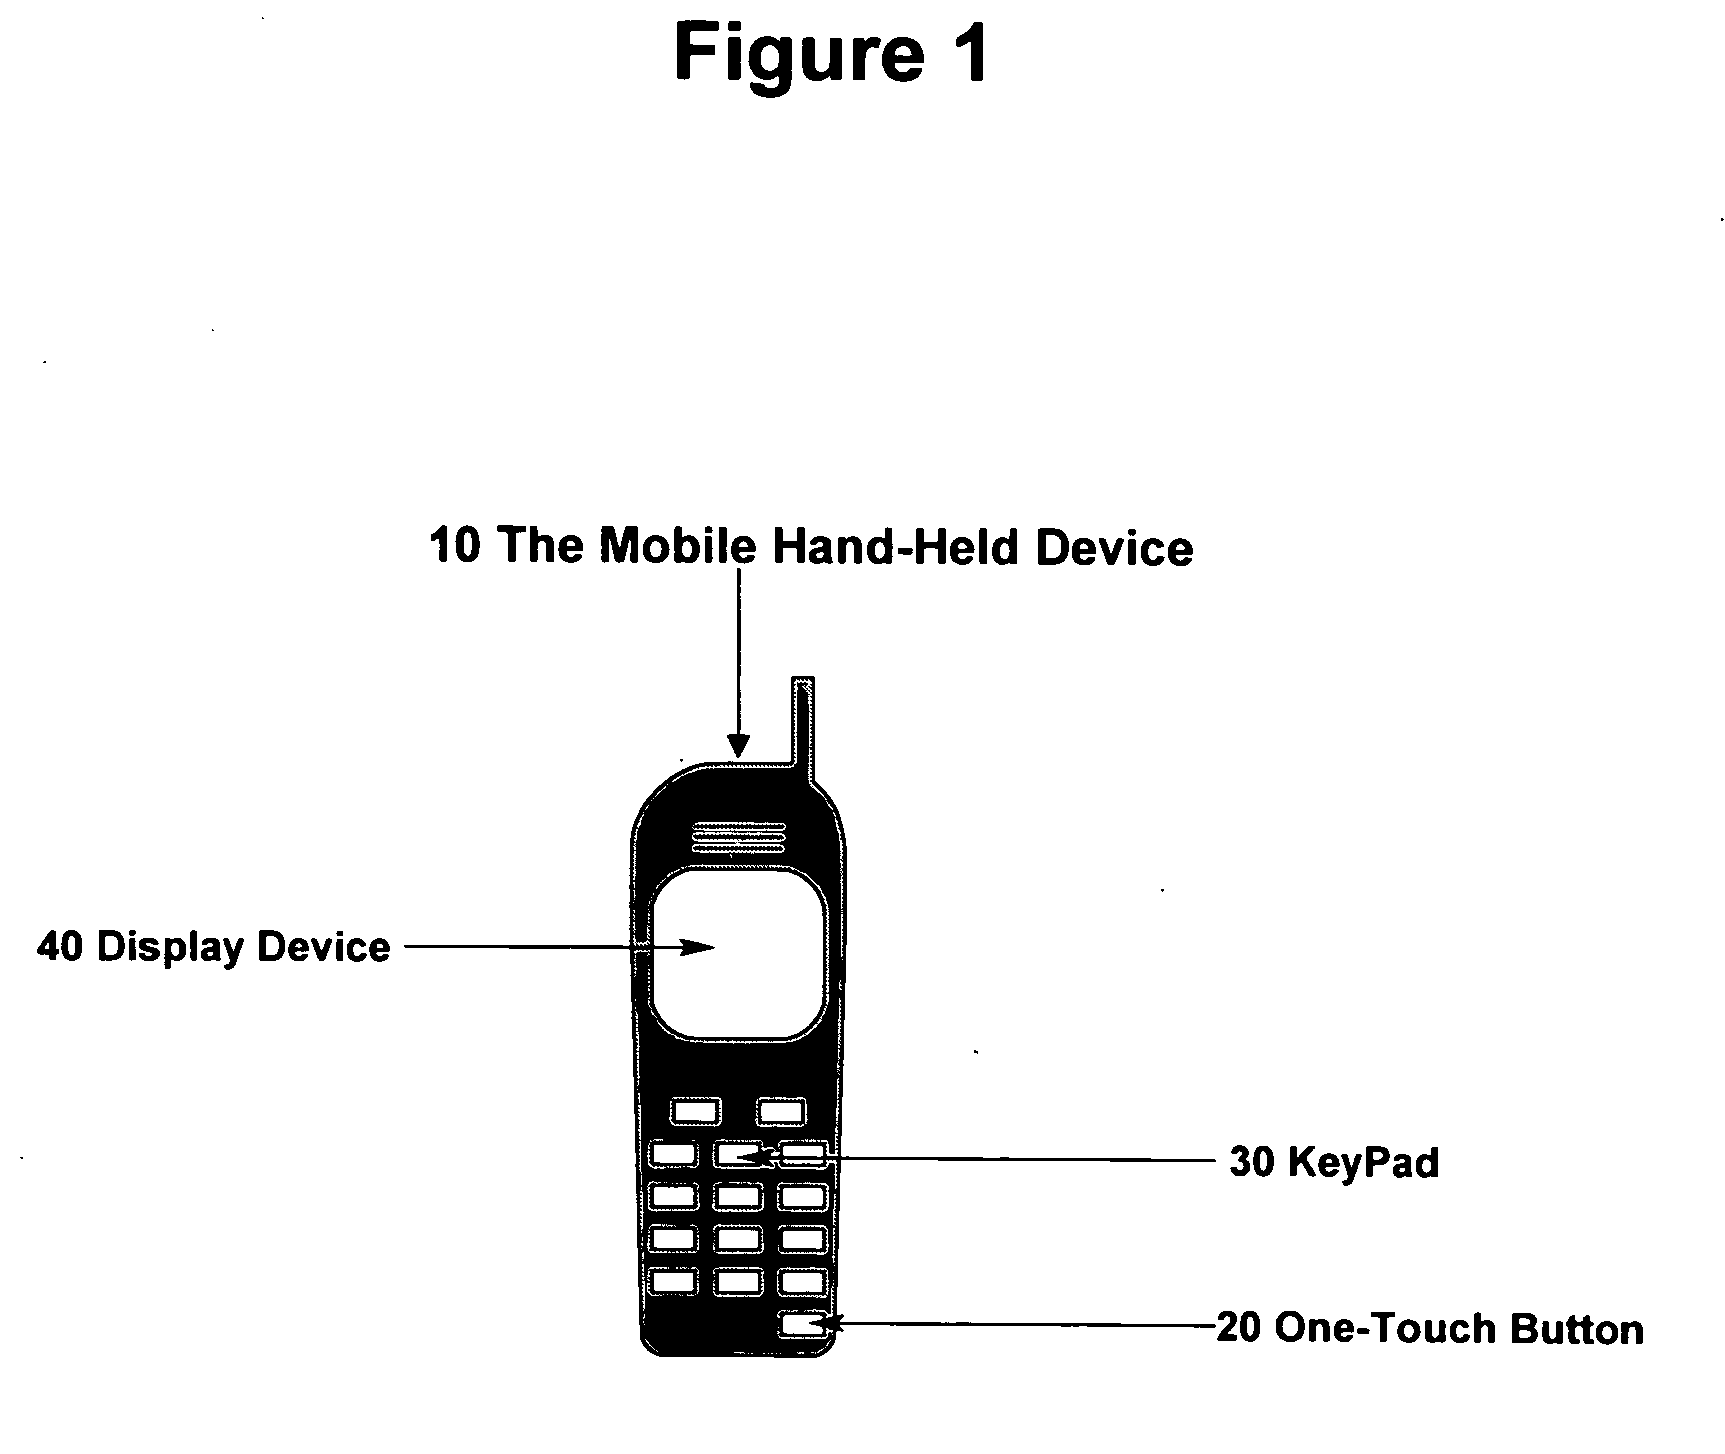 Method and apparatus for generating one-time password on hand-held mobile device